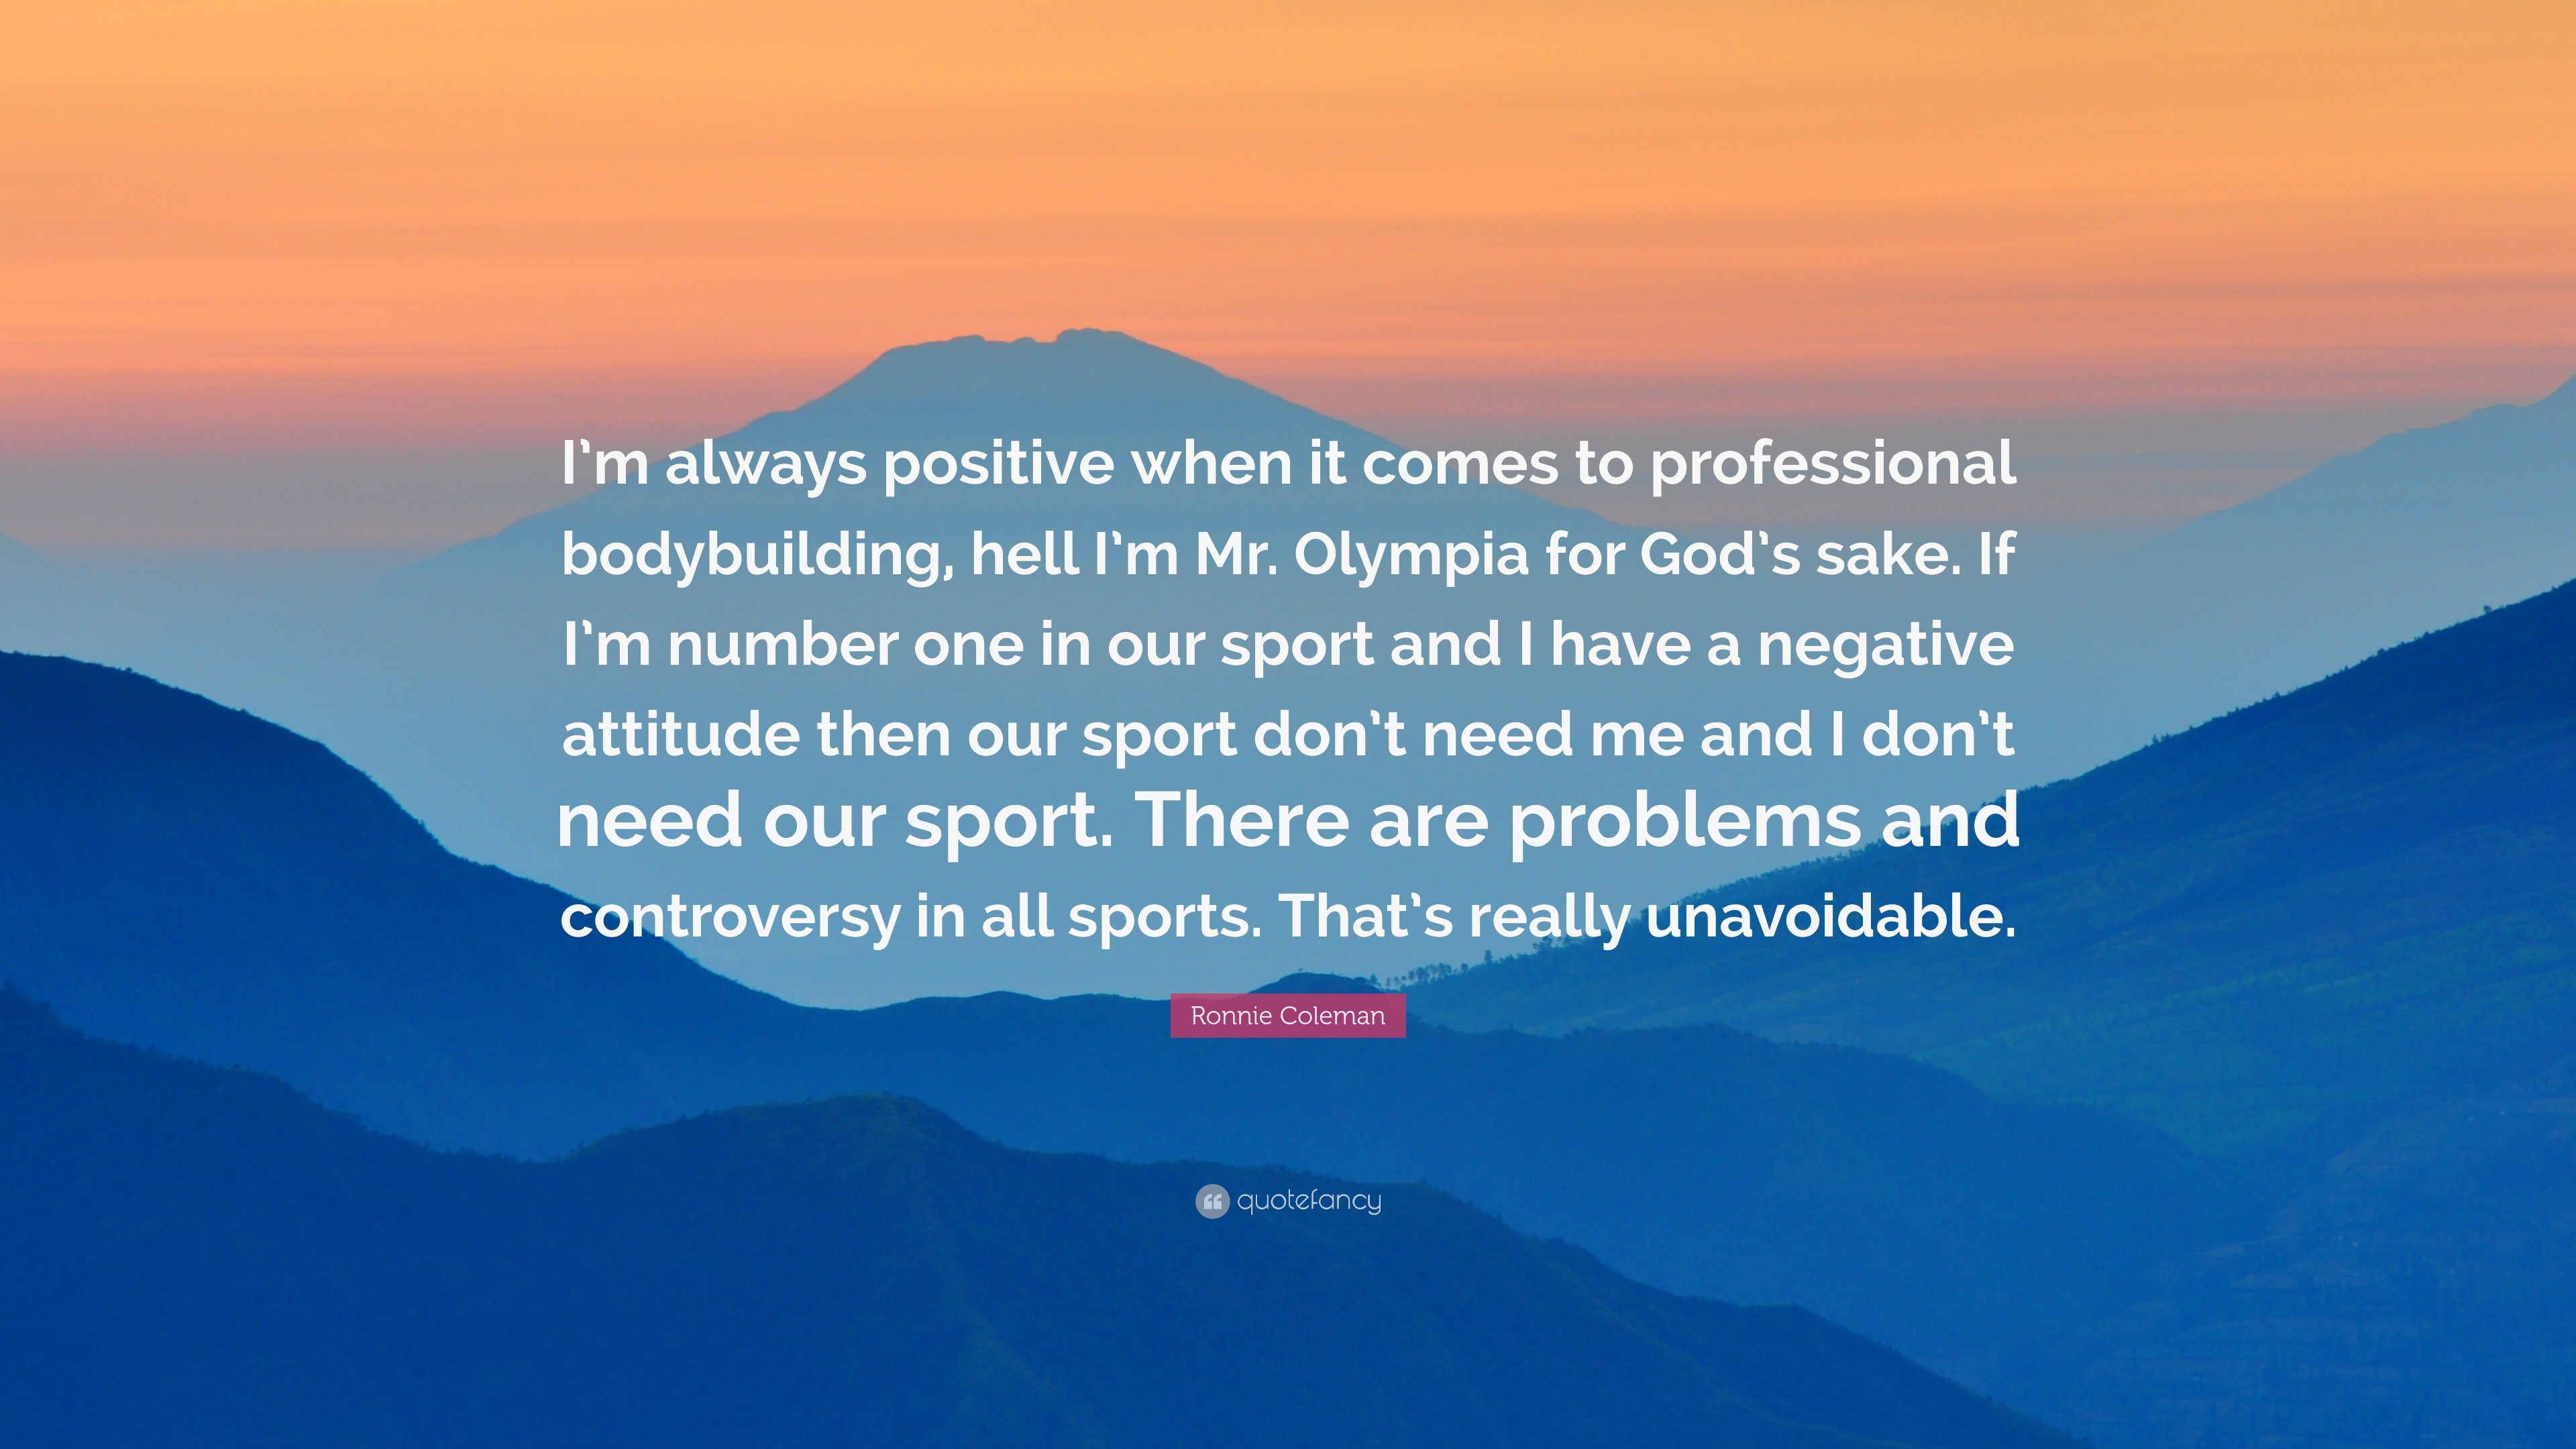 3840x2160 Ronnie Coleman Quote: “I'm always positive when it comes to professional  bodybuilding